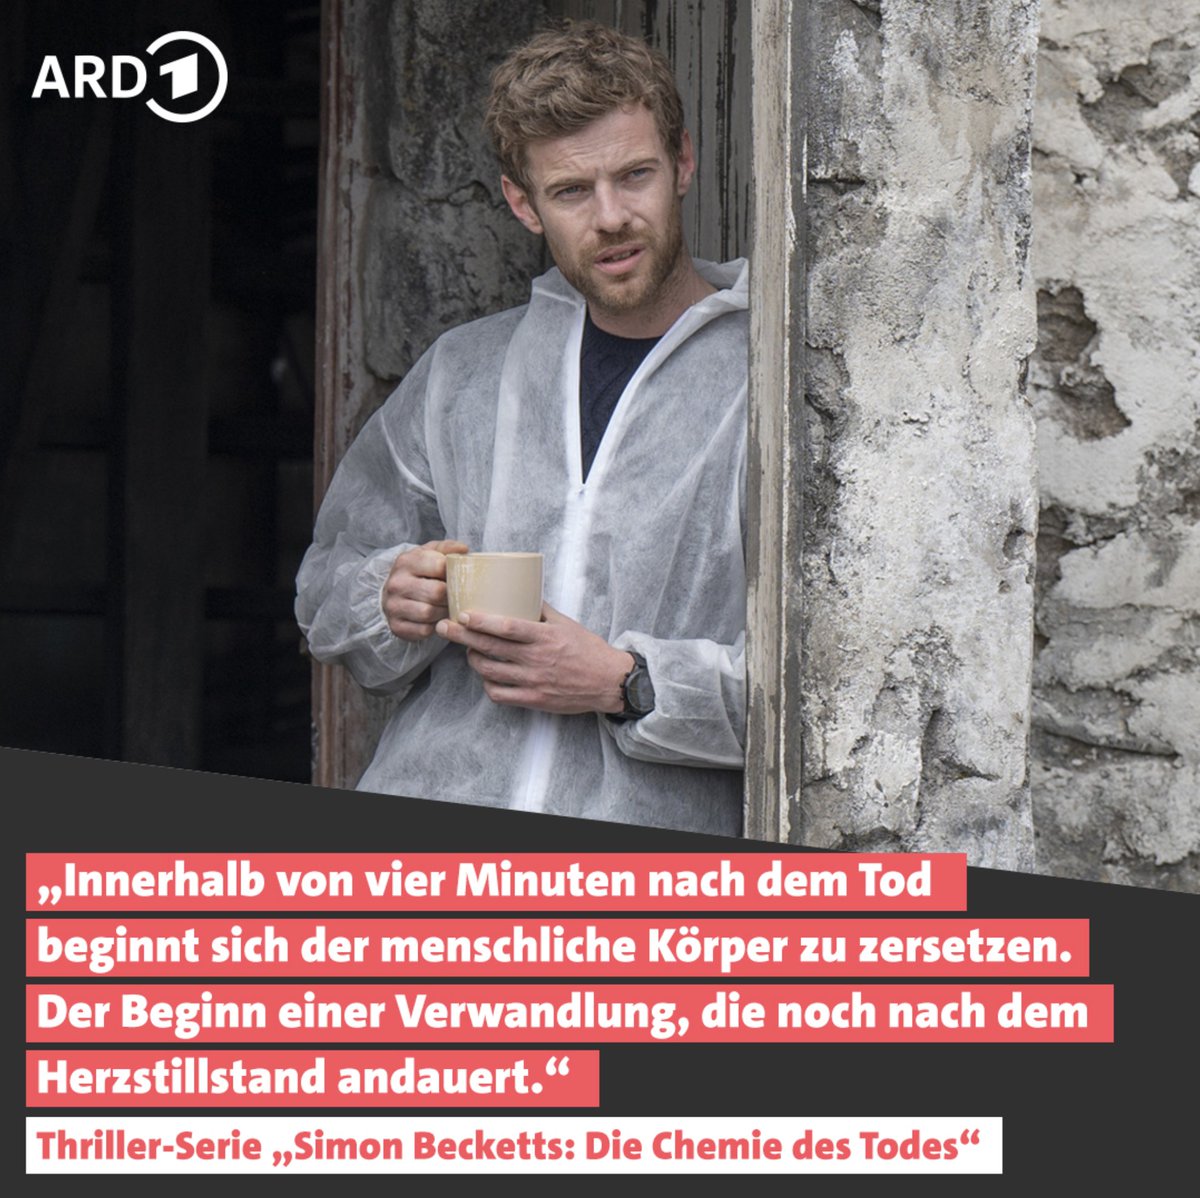 German readers: You are now able to stream all episodes of 'Die Chemie des Todes' on ARD. You can view the whole series at: 1.ard.de/die-chemie-des… (also available in the original English language version).